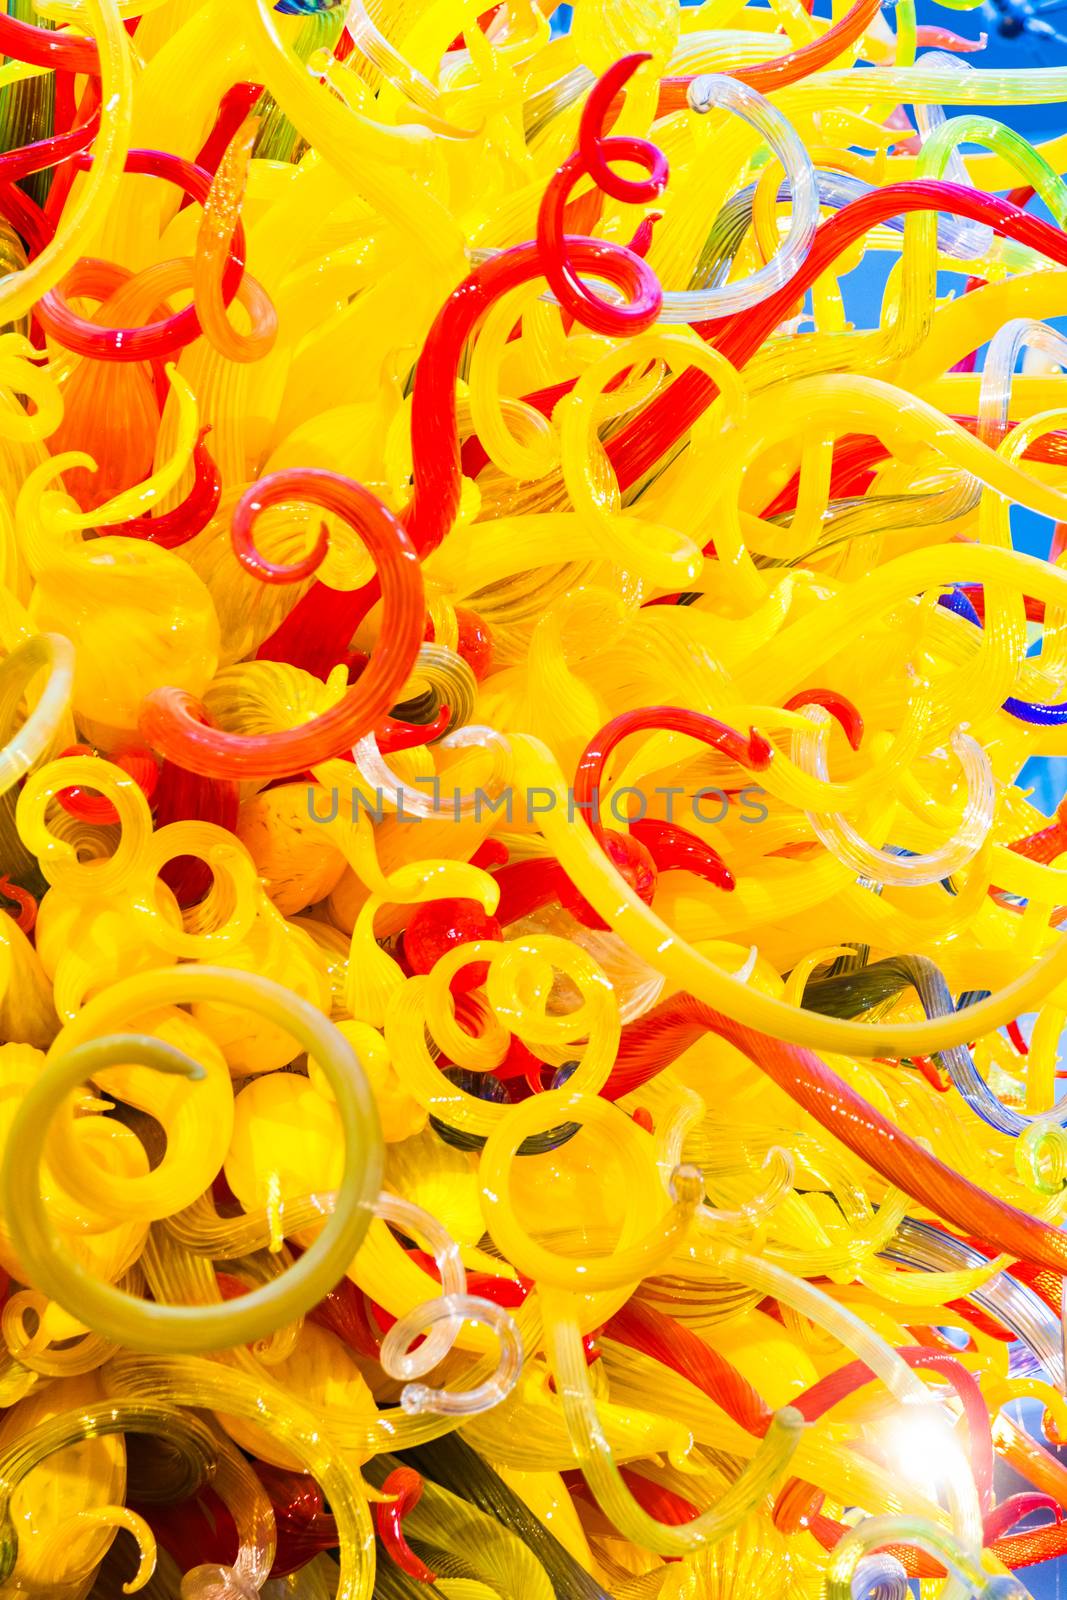 Editorial - Montreal, Canada - The Sun is a sculpture at the Montreal Fine Arts Museum created by Dale Chihuly